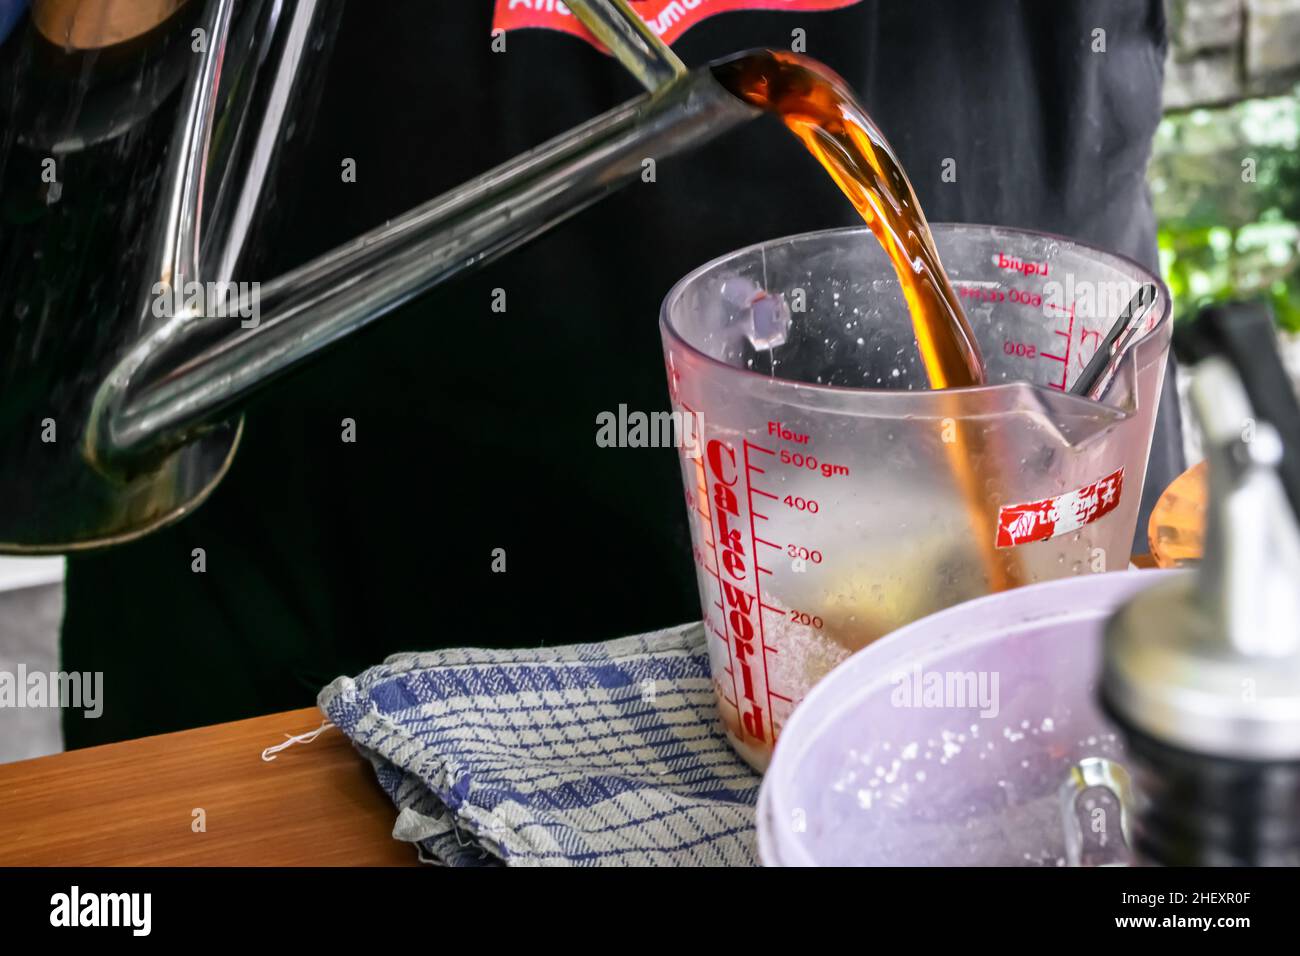 metallic chrome traditional vintage water jug or teapot pouring the brown tea into the measuring cup Stock Photo